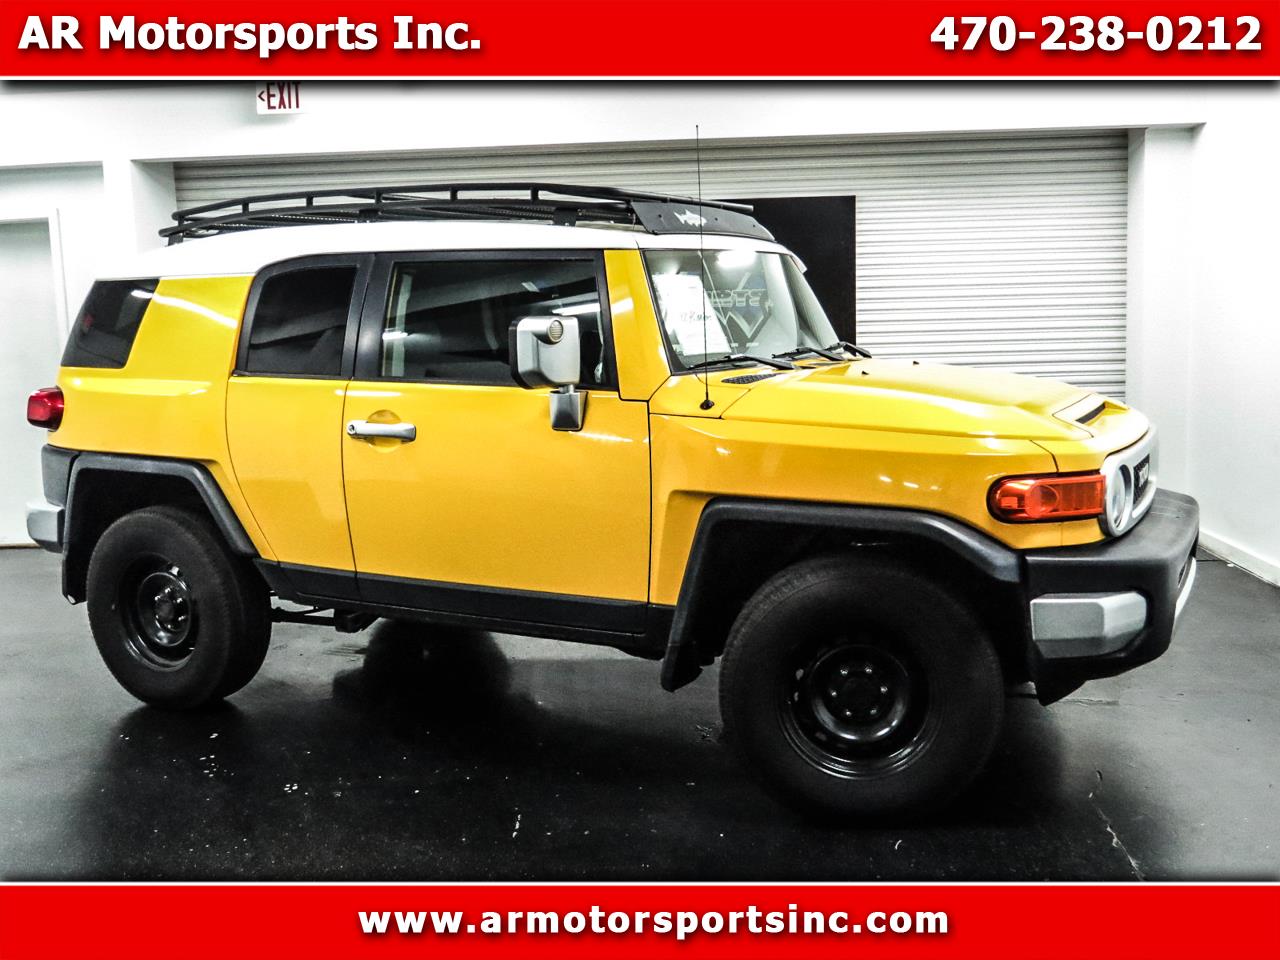 Used 2007 Toyota Fj Cruiser 4wd At For Sale In Buford Ga 30518 Ar